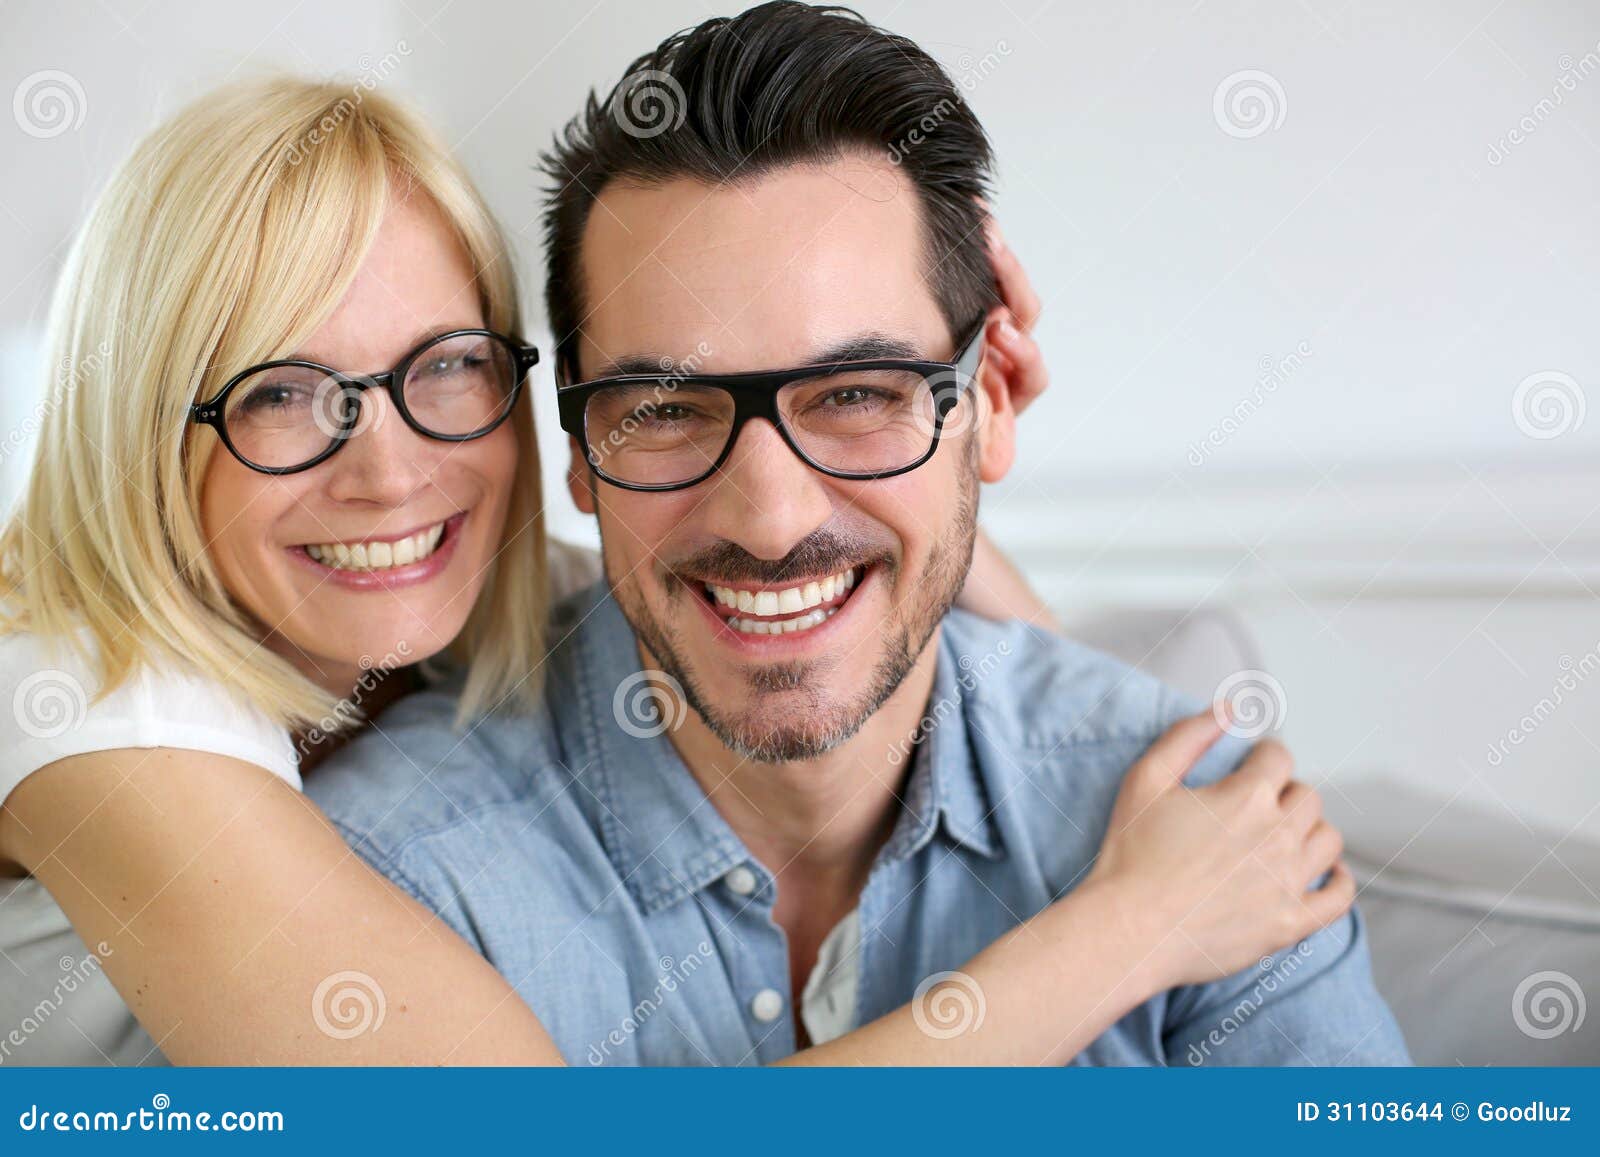 funny couple at home with eyeglasses